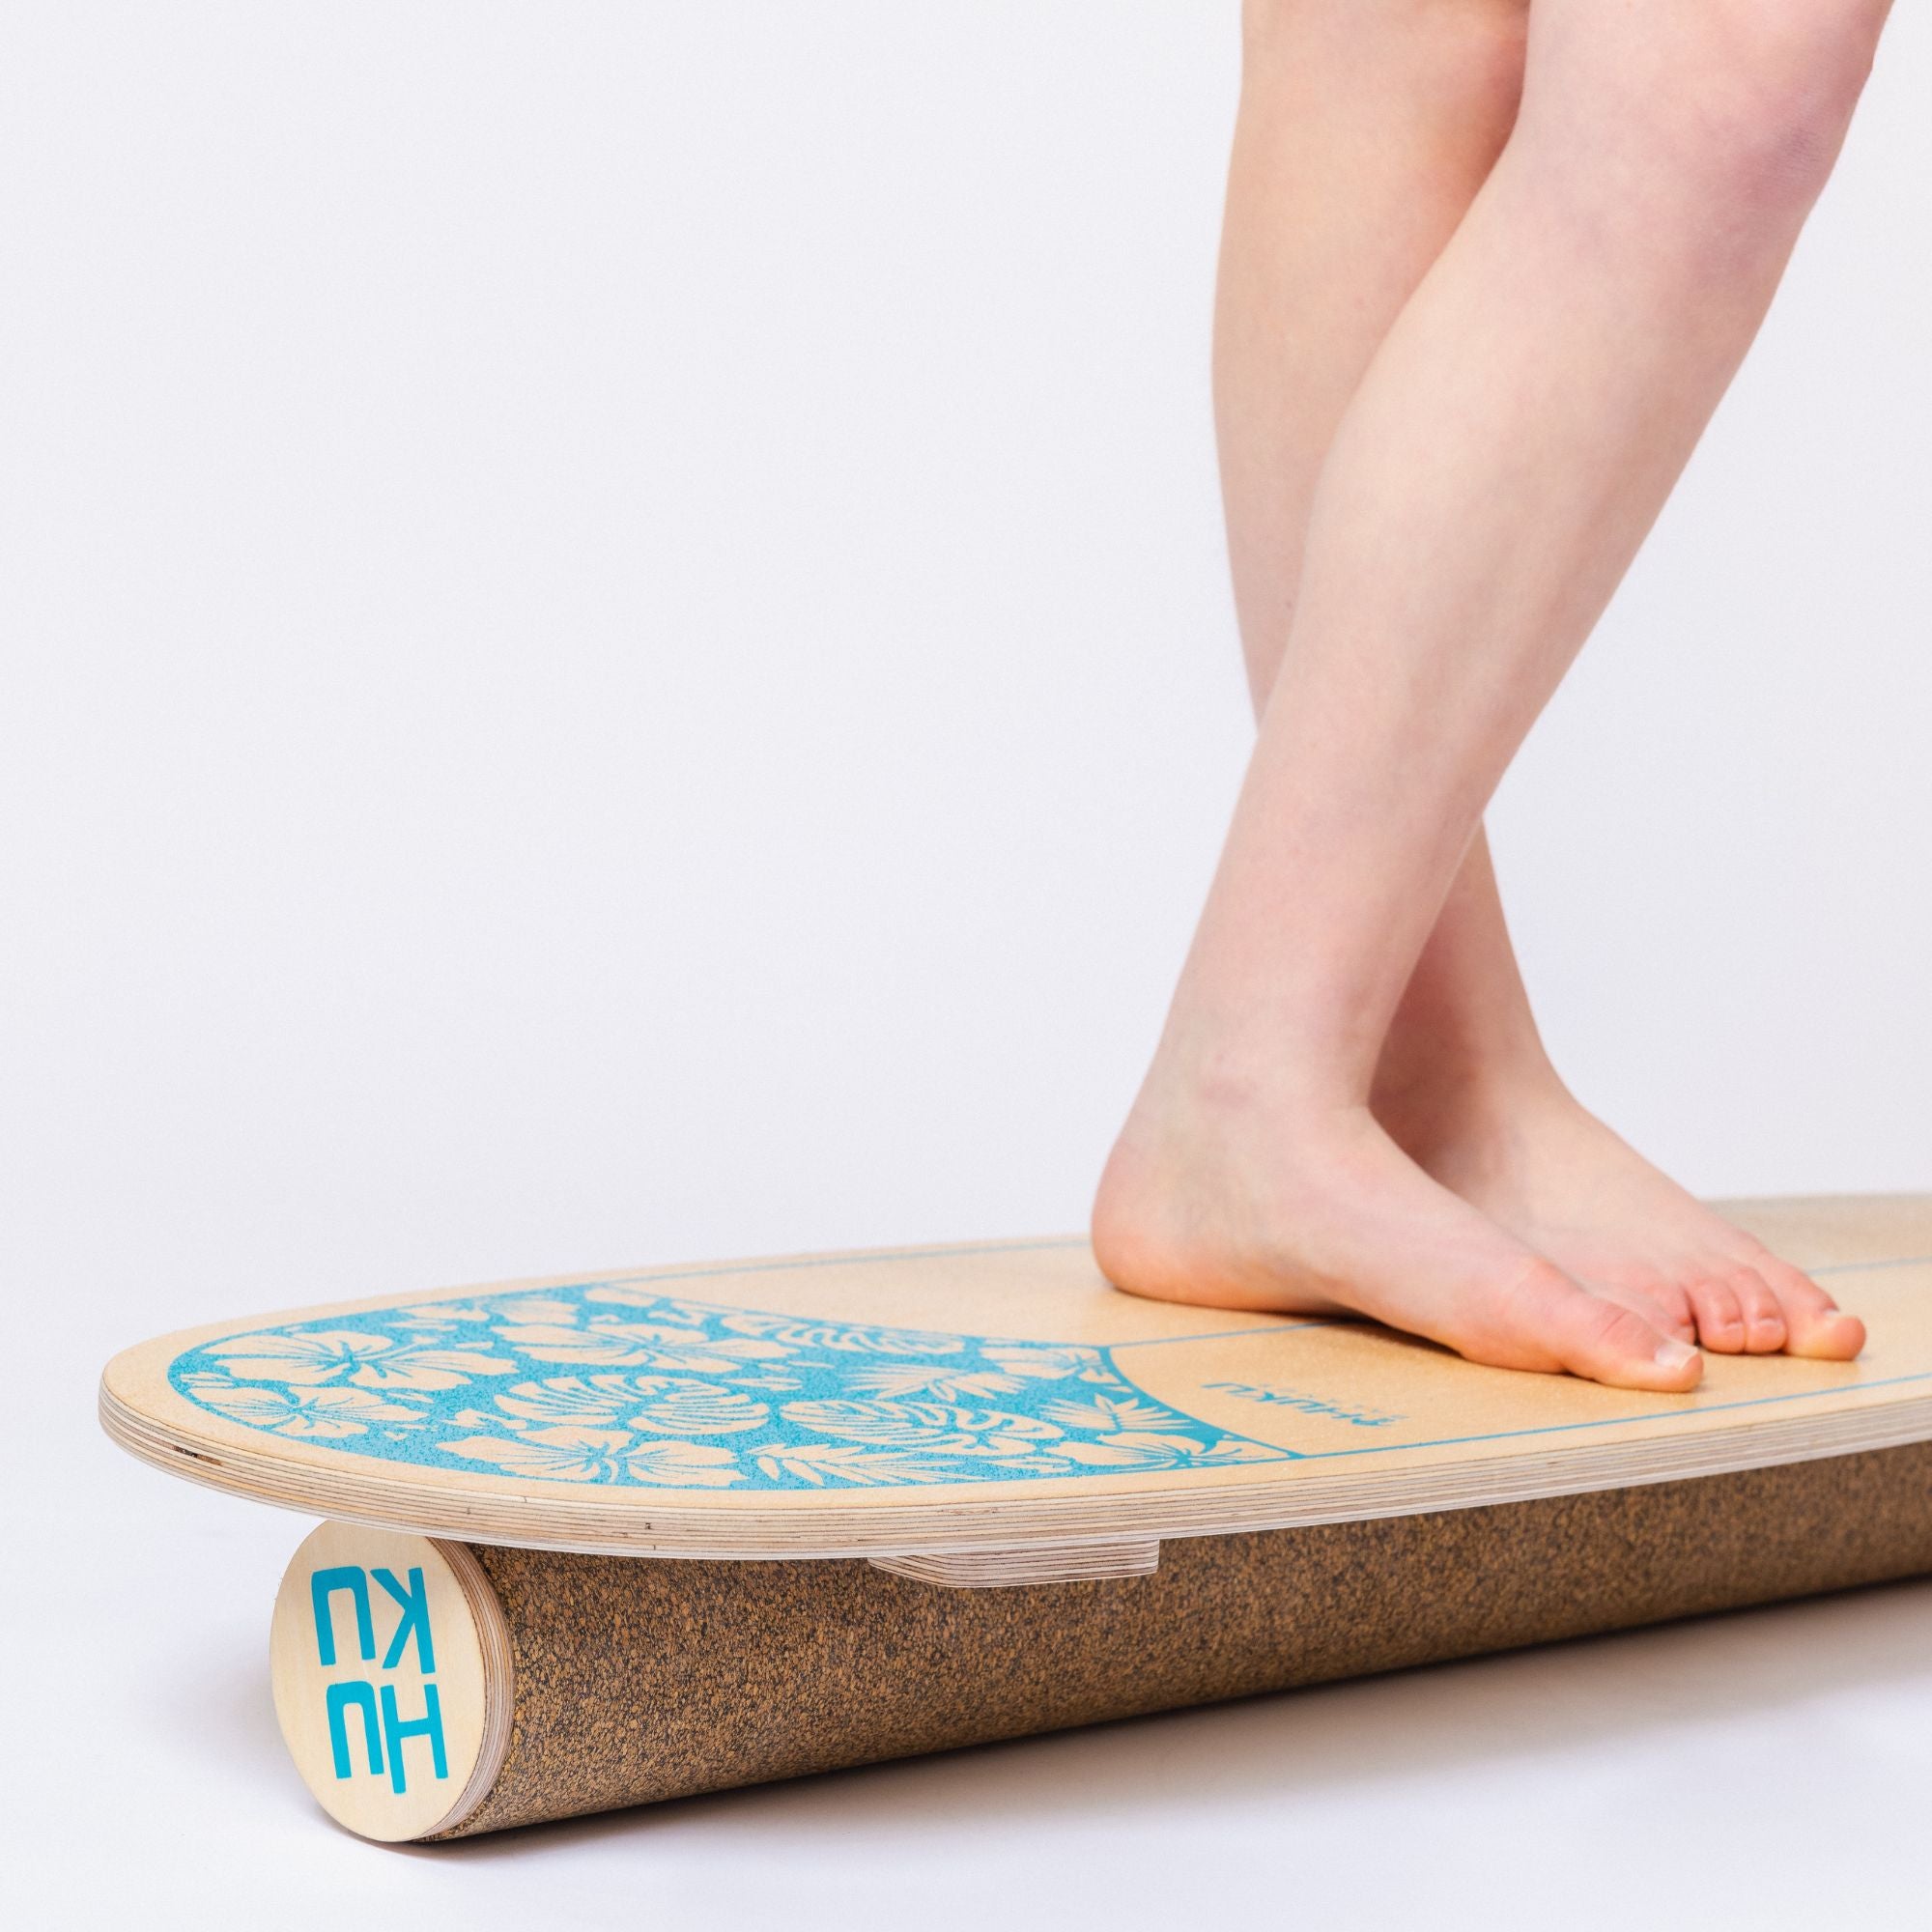 Huku Nalu Balance Board - practise your cross-stepping. For surfers, snowboarders, and who use a heel-to-toe movement.